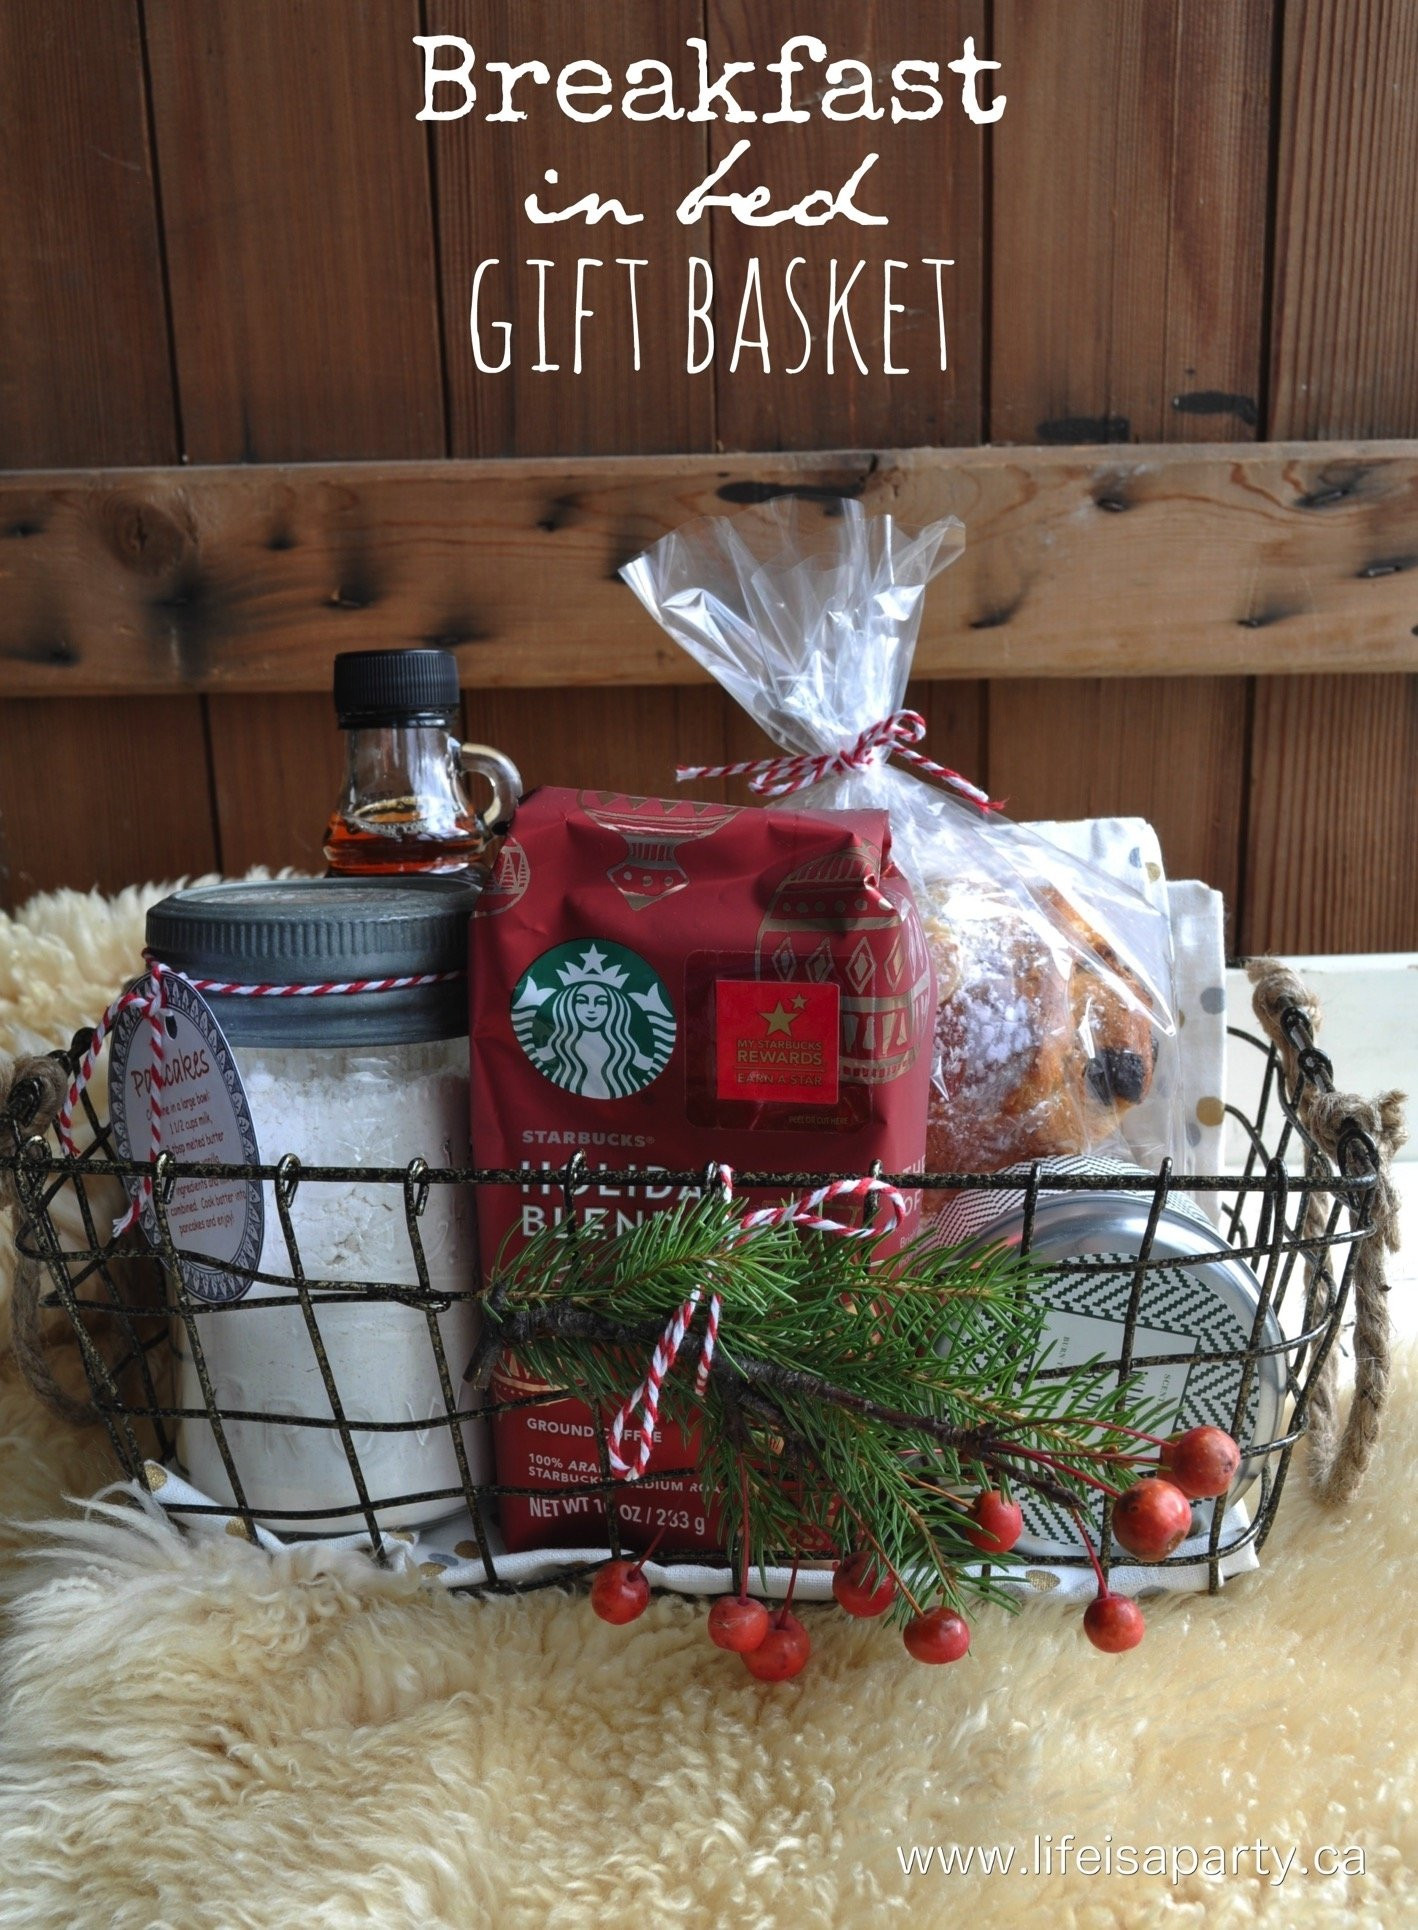 Gift Ideas Couples
 10 Stylish Christmas Gift Basket Ideas For Couples 2020